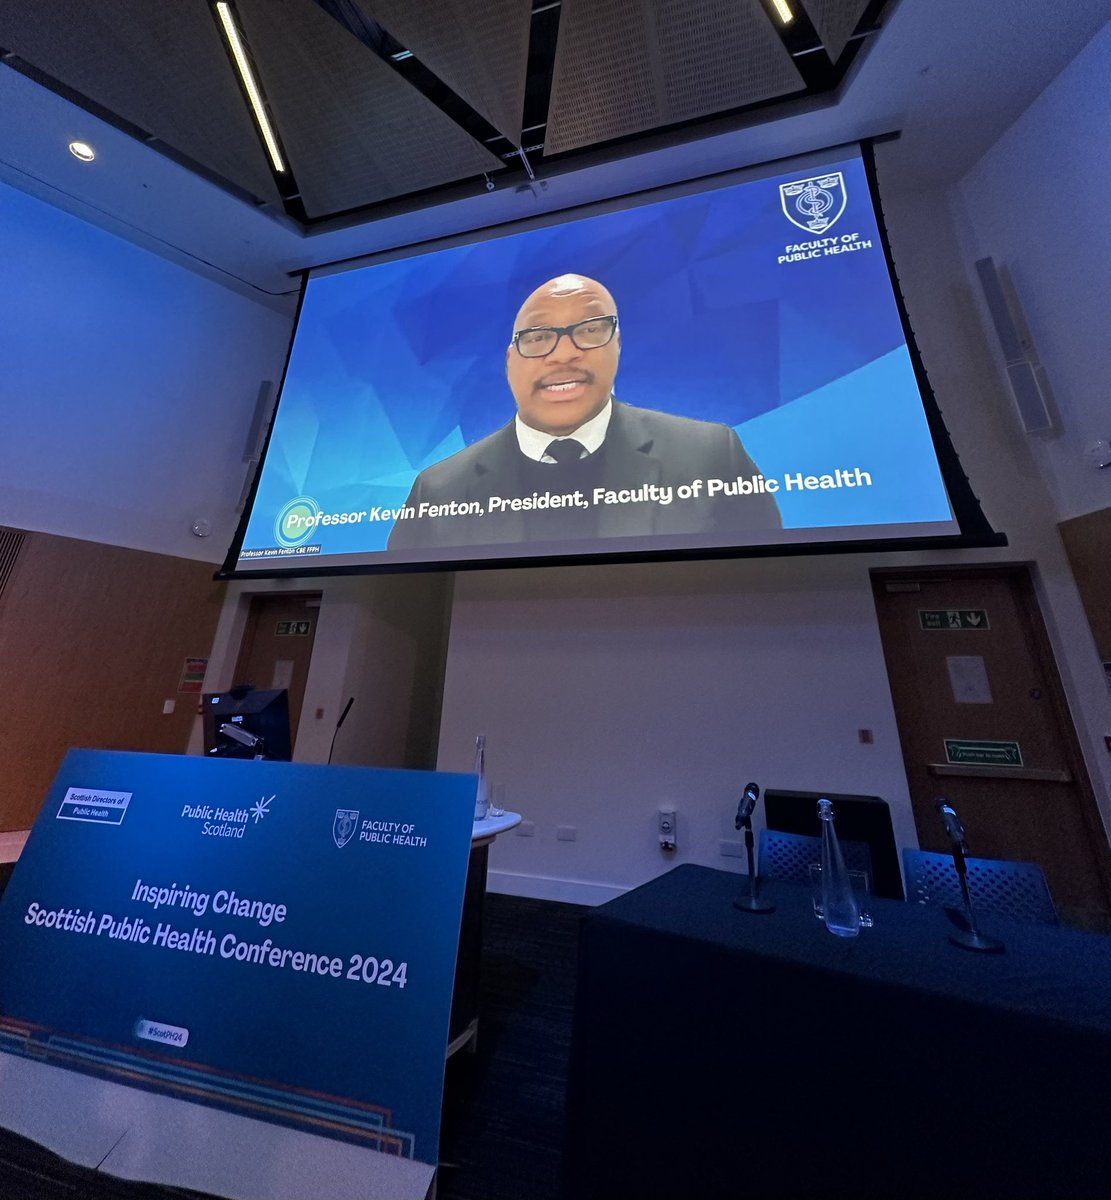 #ScotPH24 @ProfKevinFenton keynote address at the Scottish PH conference, Inspiring Change
Bold and ambitious actions, change & transformative leadership needed from Govt, Local Authorities & the PH family to reduce inequalities & enable everyone to live long healthy lives.